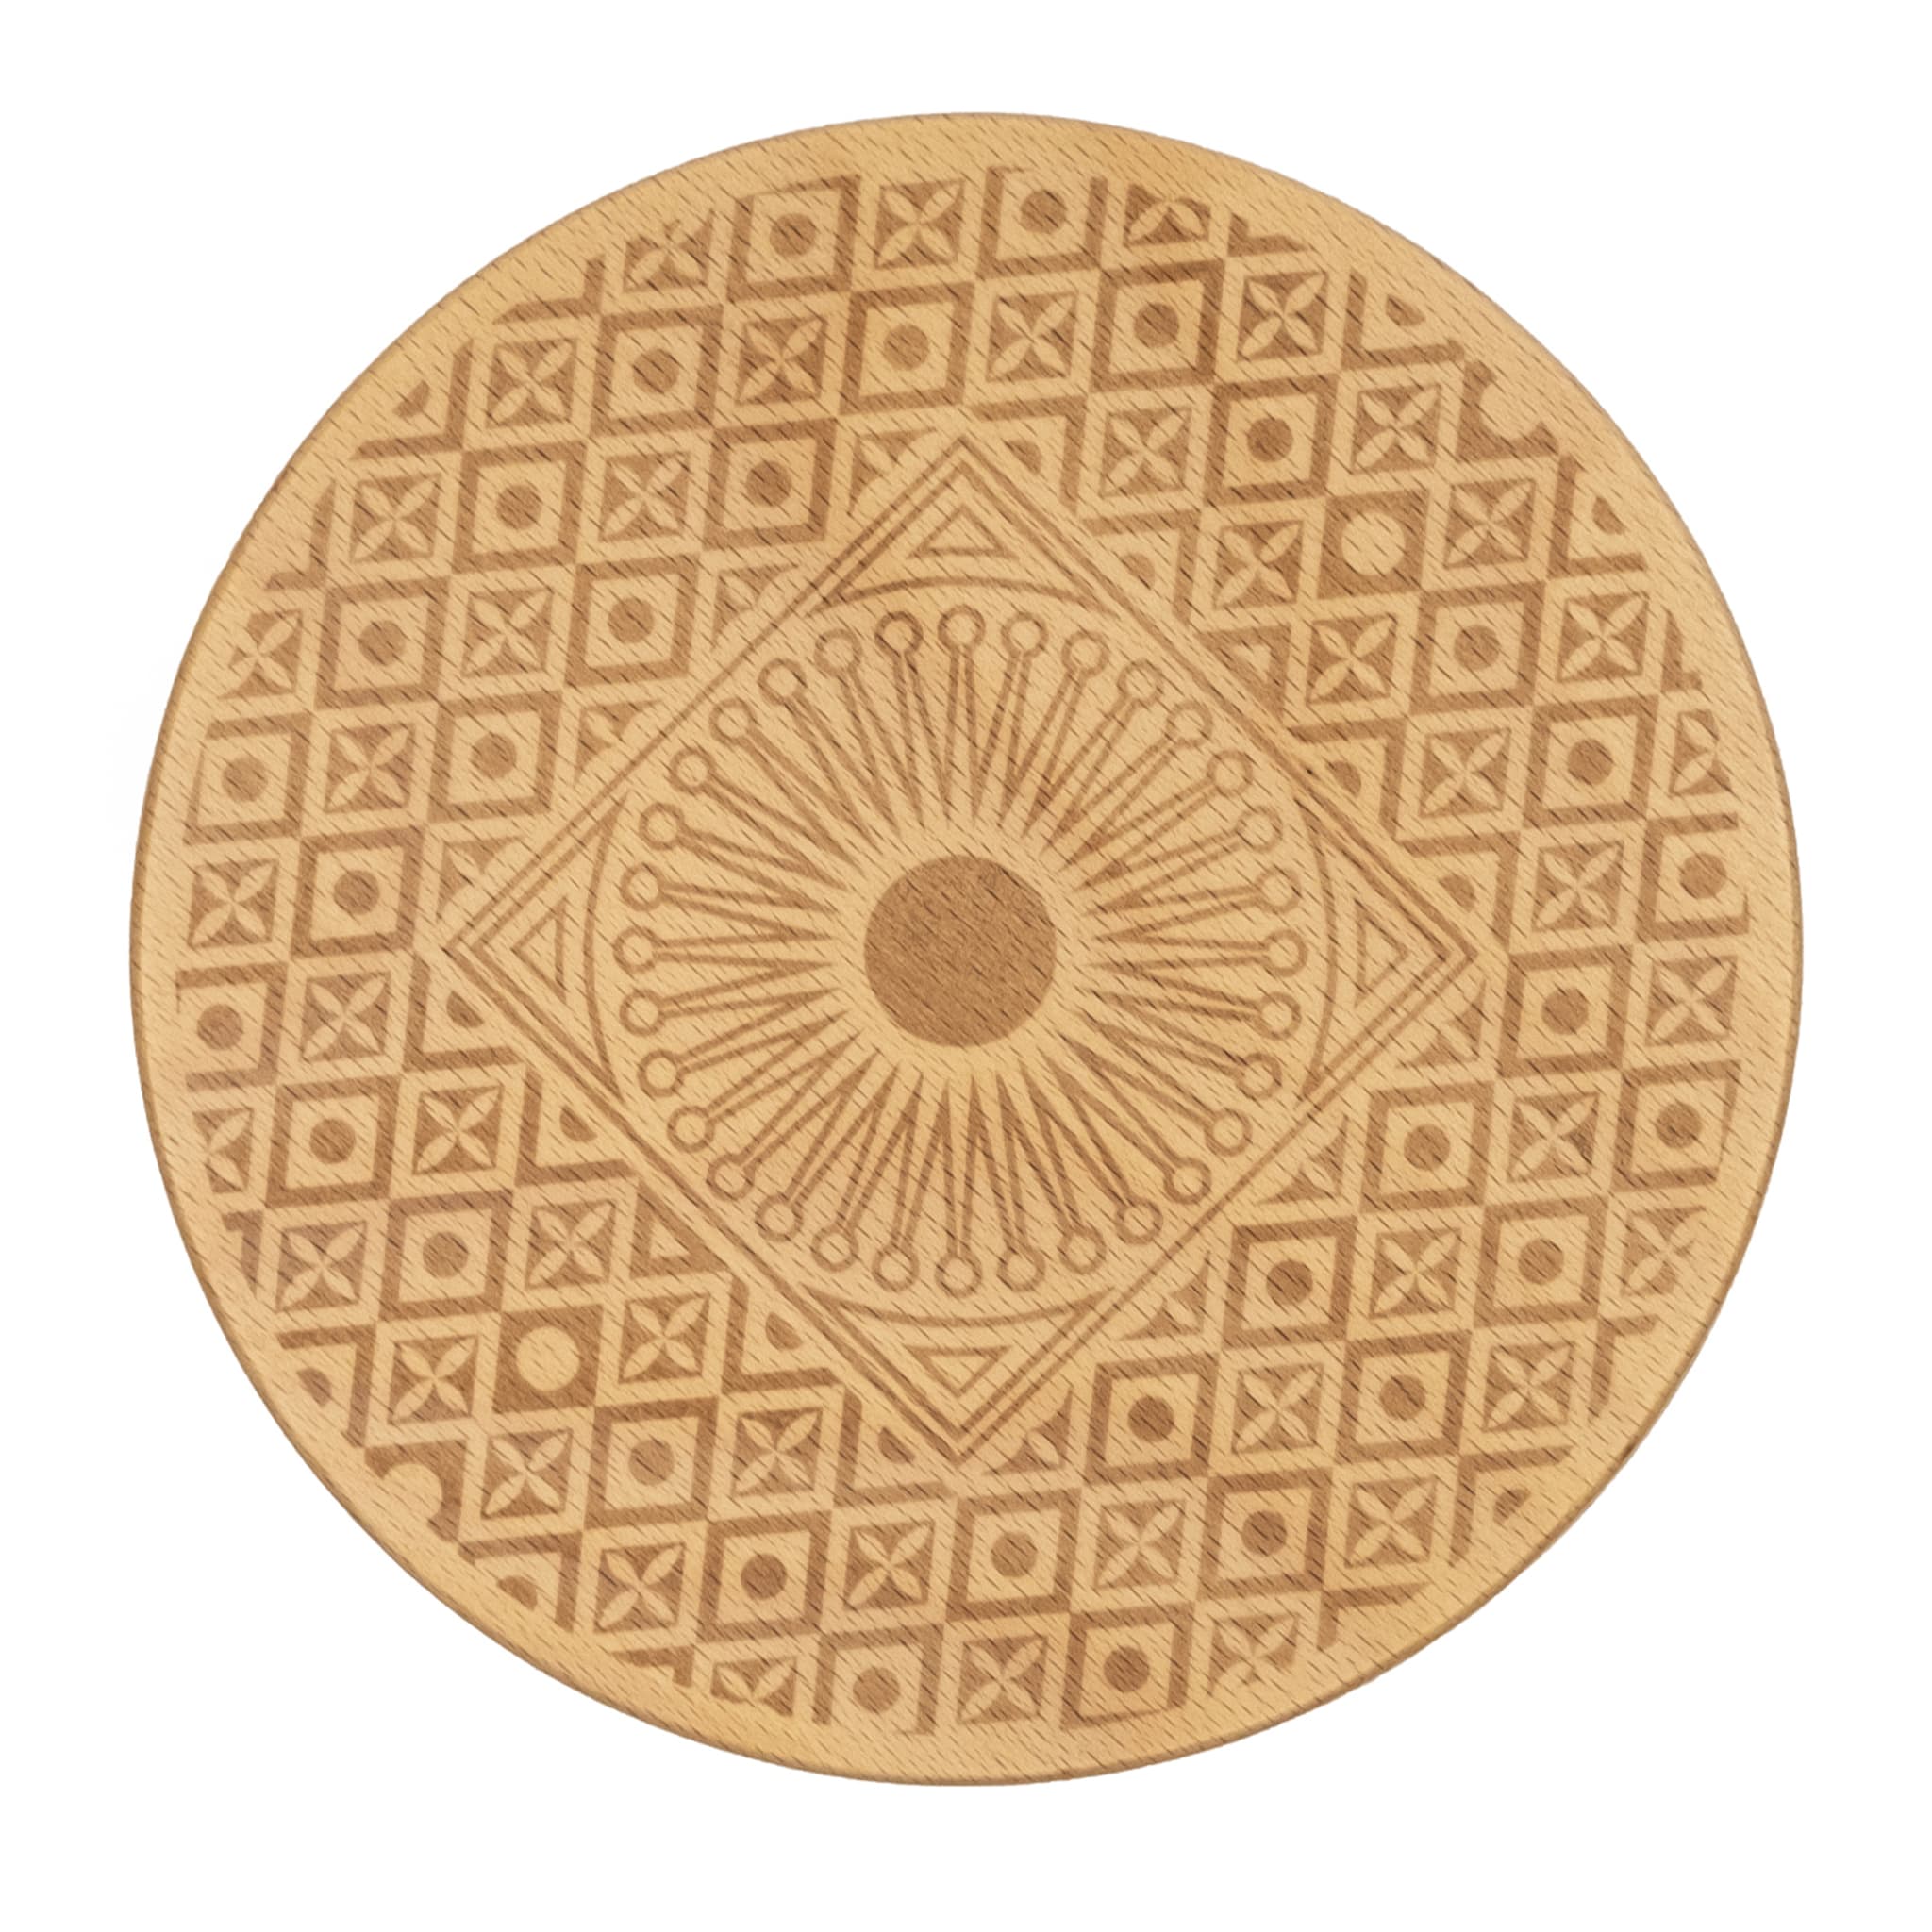 Sofia & Tecla Set of 2 Charger Plates by Luca Maci - Alternative view 2